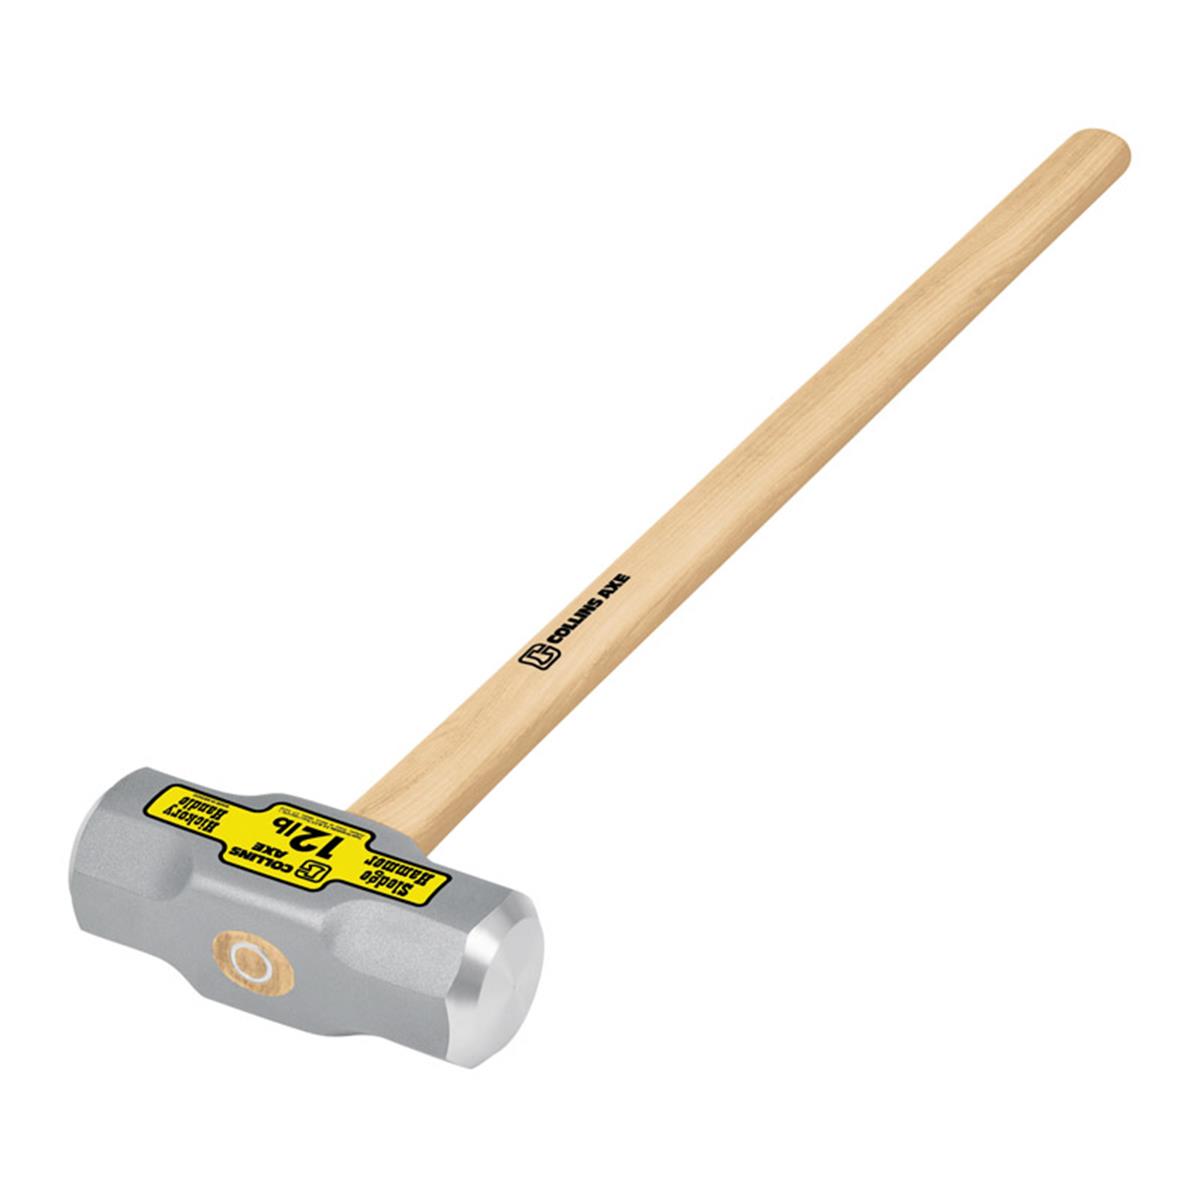 Md-12h-c32428 2 Face Sledge Hammer Collins